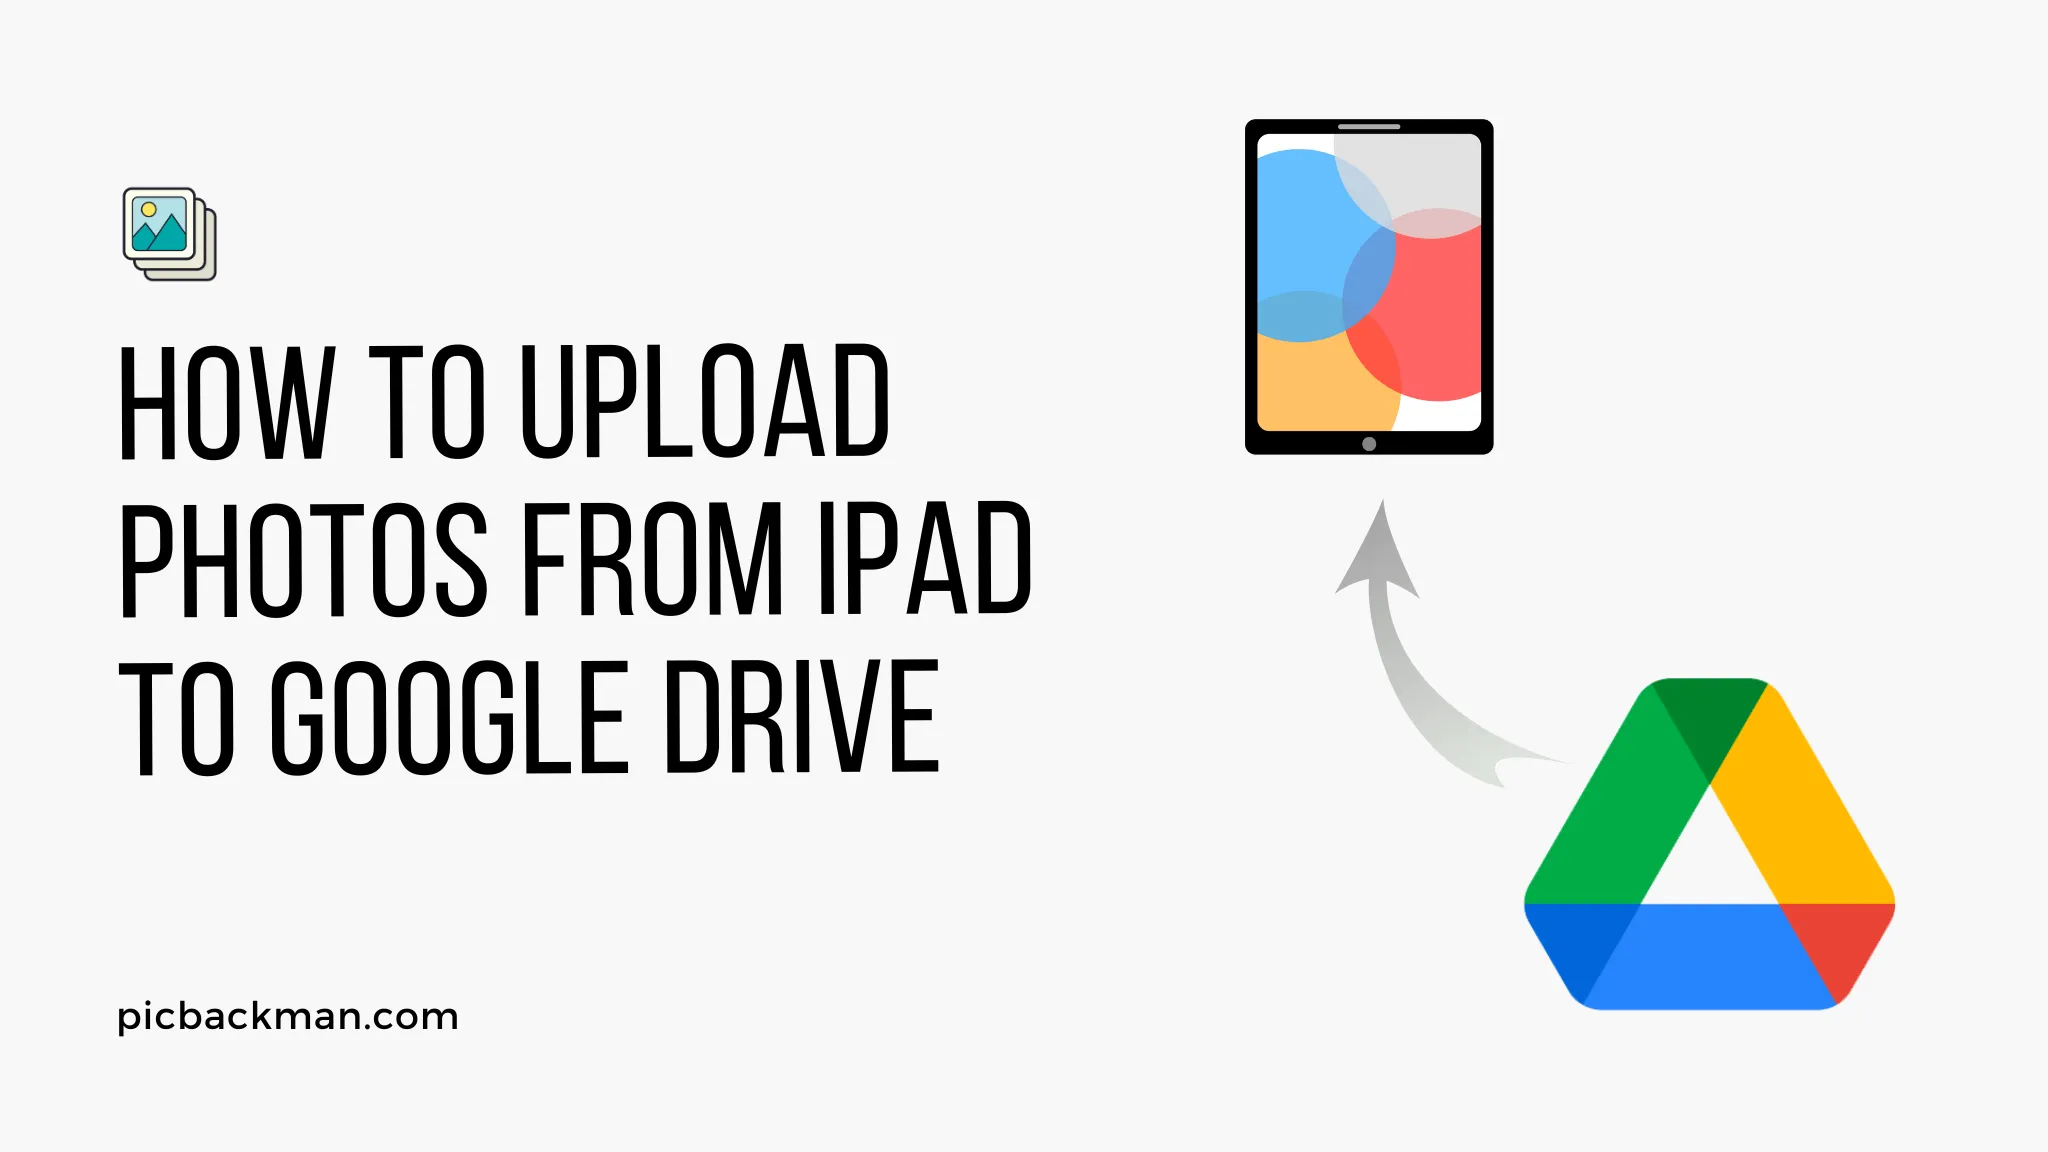 How to upload photos from iPad to Google Drive?